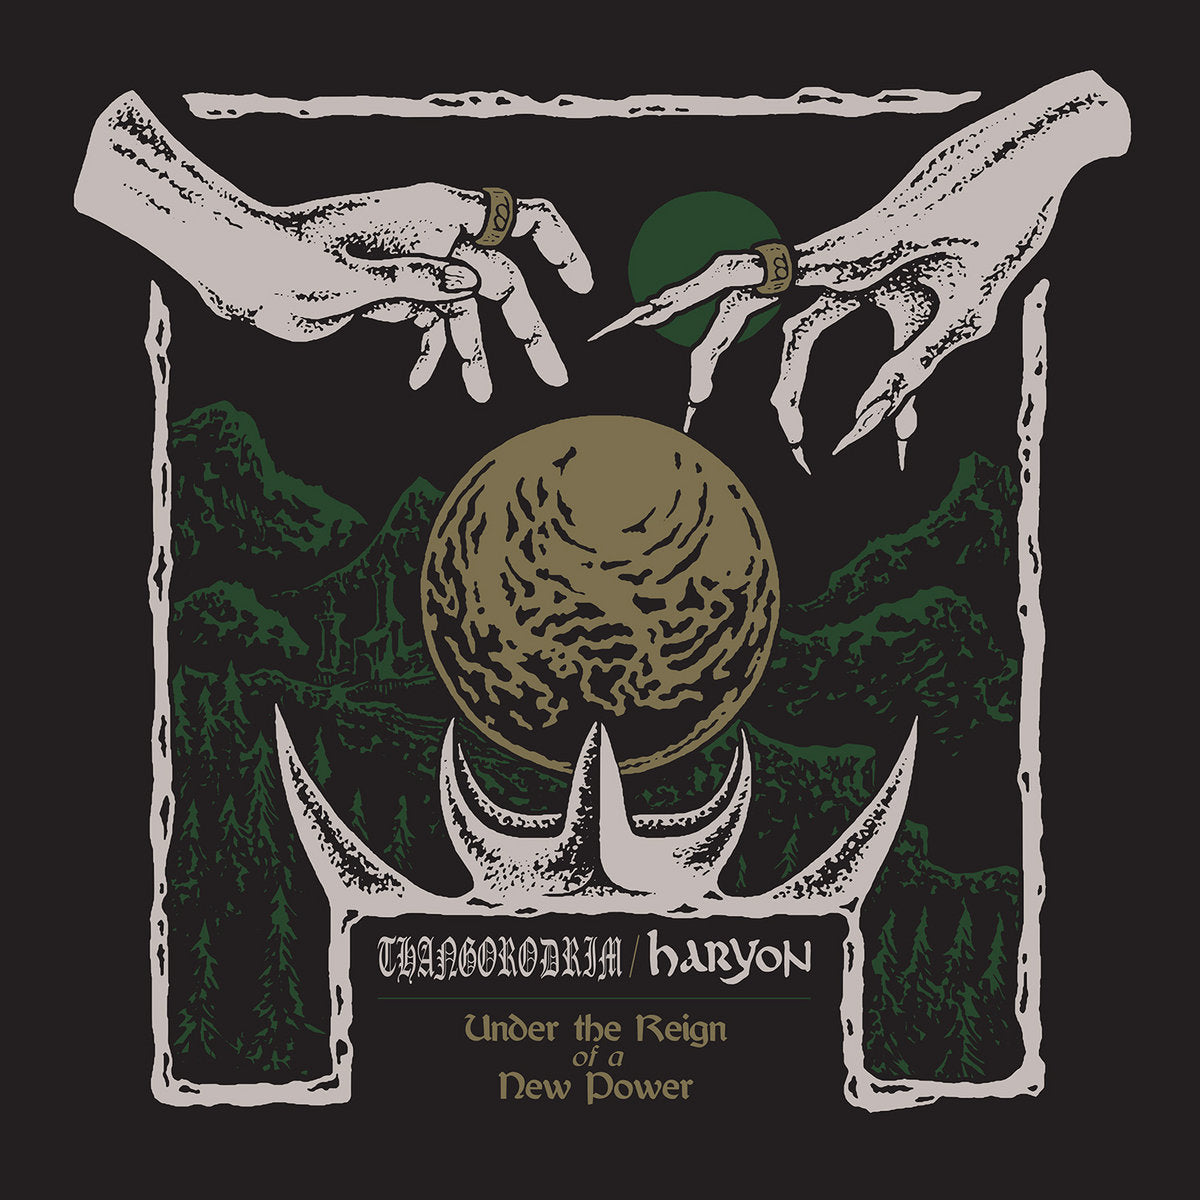 [SOLD OUT] THANGORODRIM / HARYON "Under the Reign of a New Power" vinyl LP (lim.500)